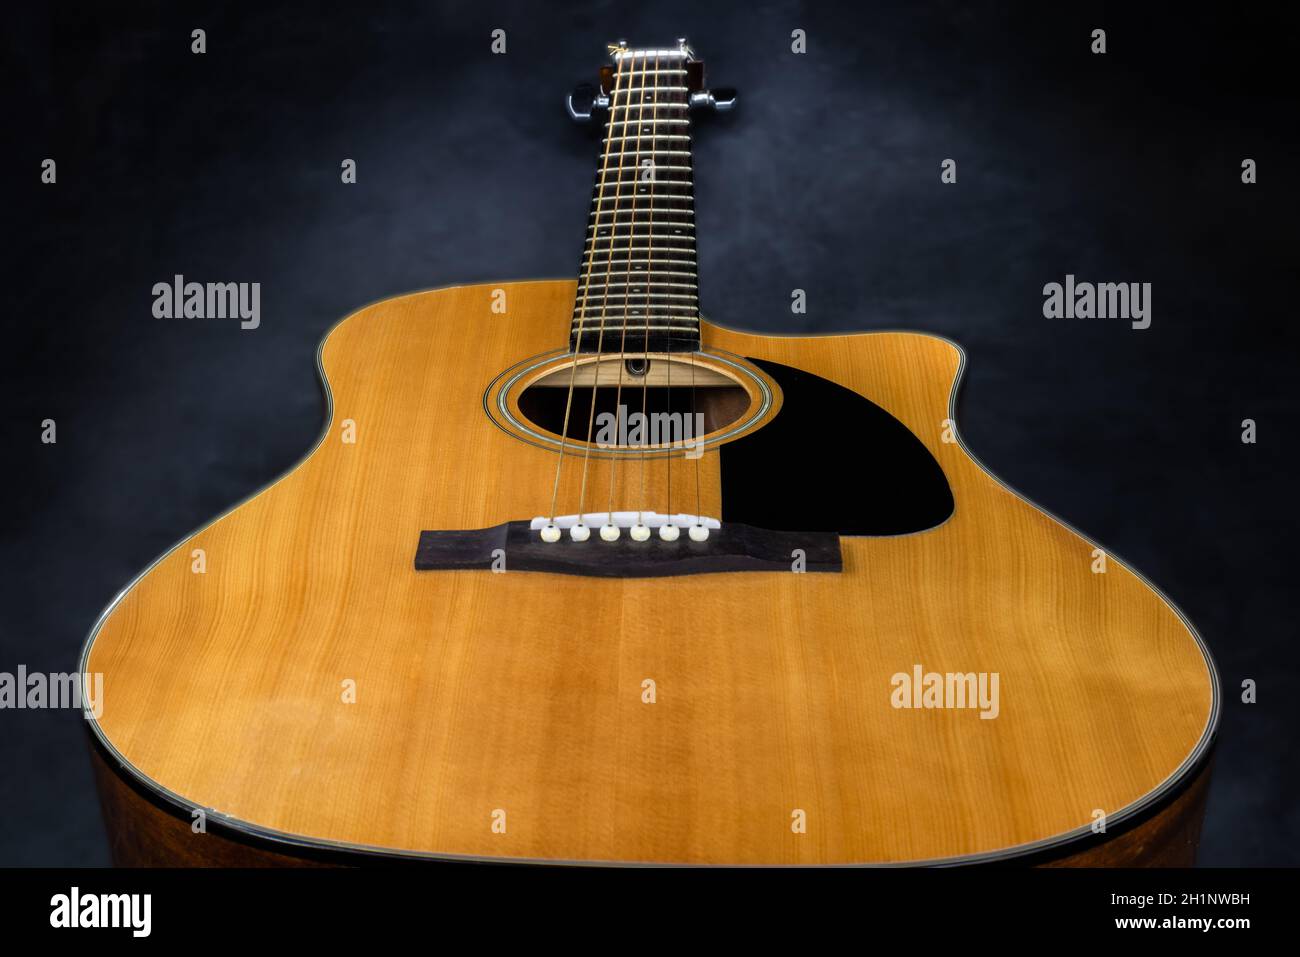 acoustic guitar with yellow deck and black pickguard on isolated black background Stock Photo